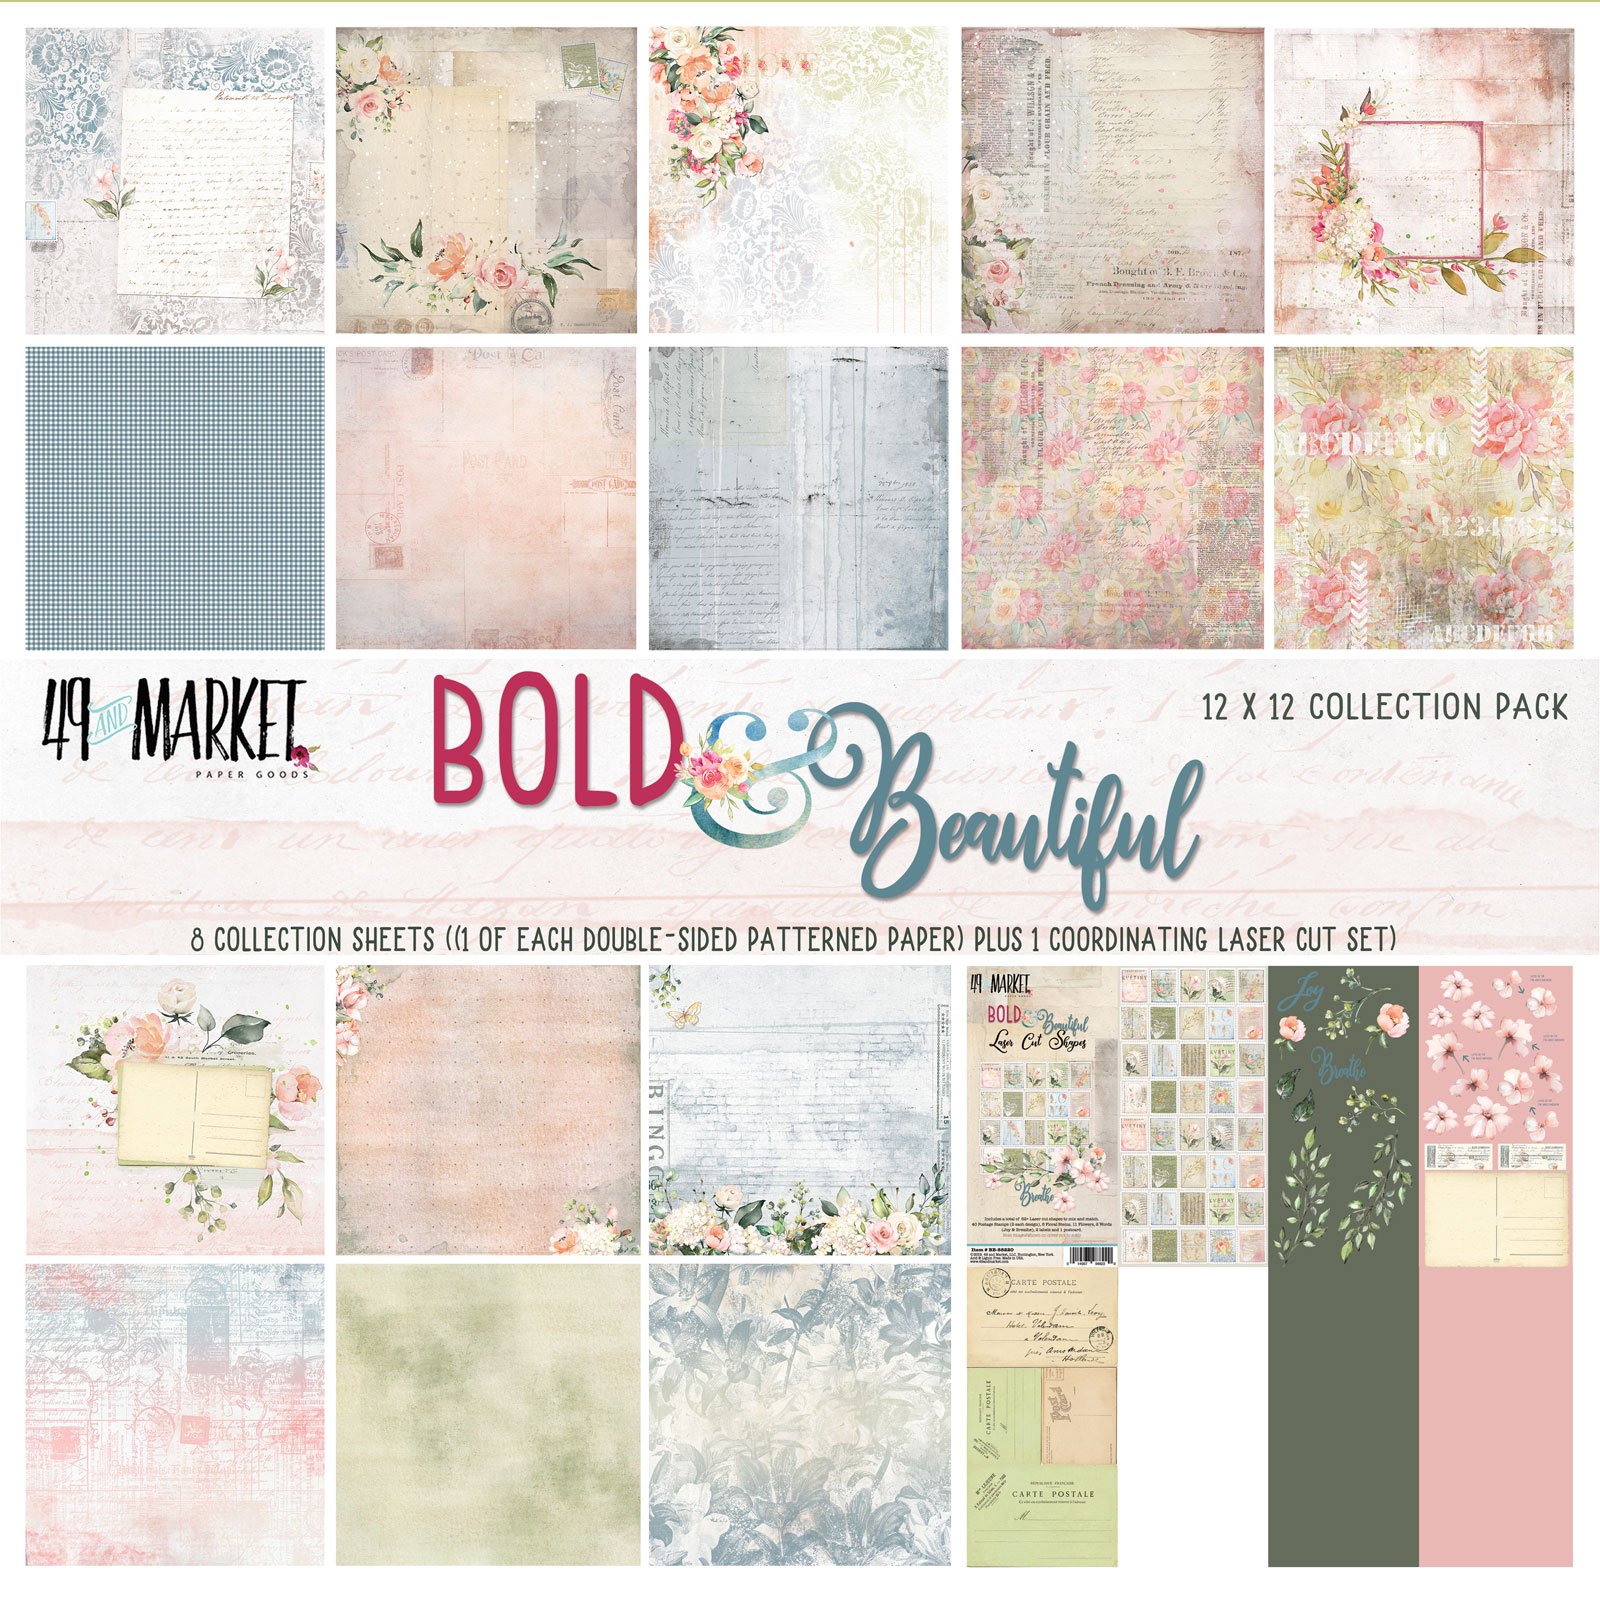 Bold and Beautiful 12x12 Collection Pack